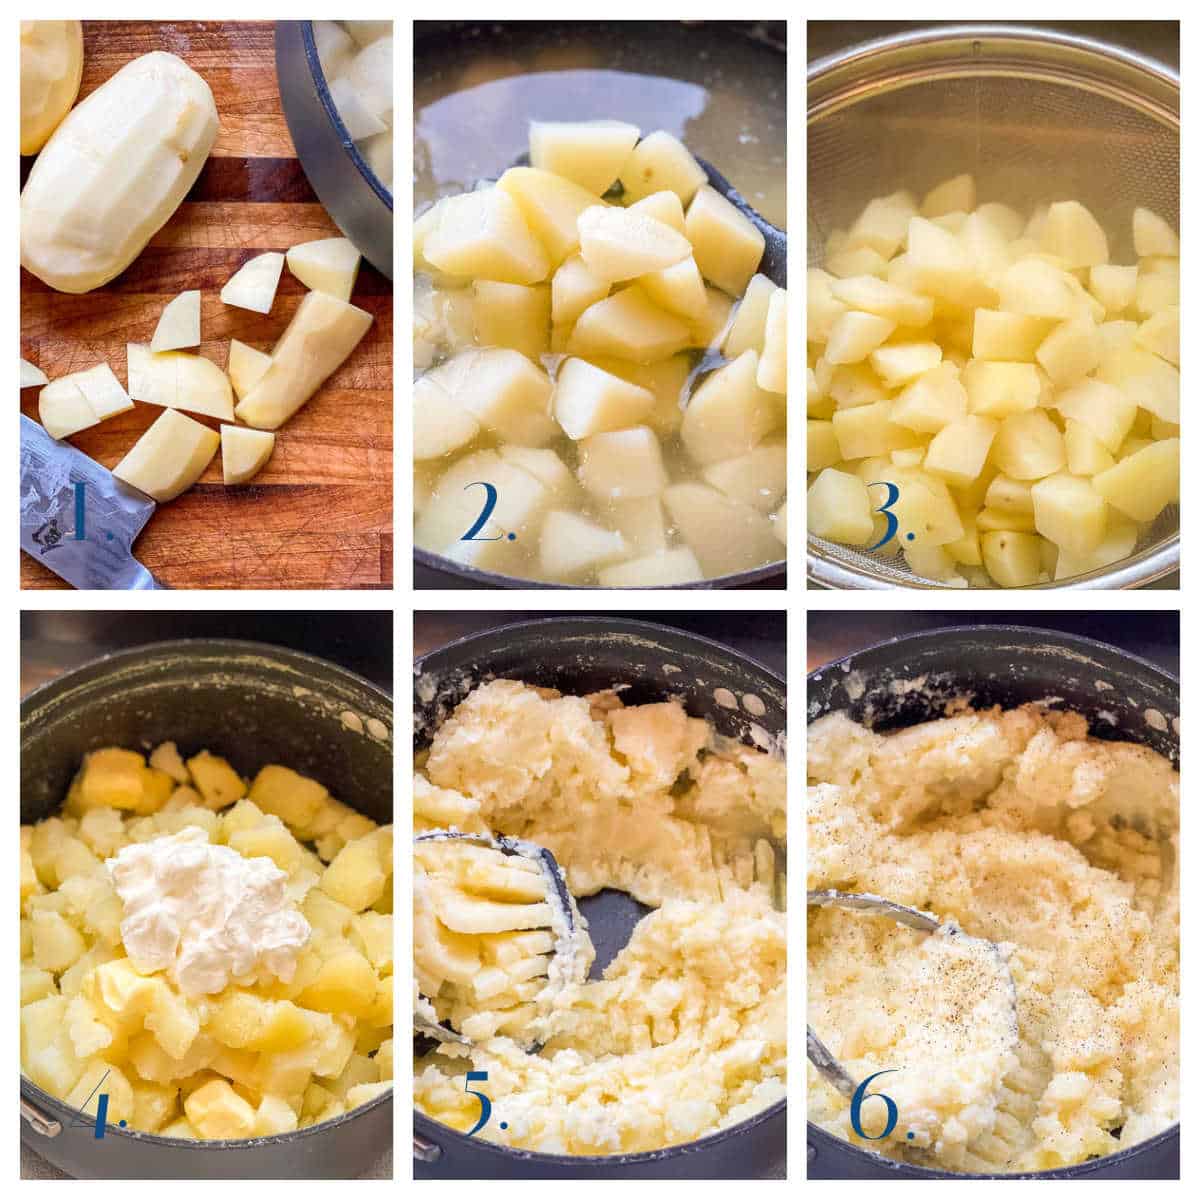 Process collage showing 6 steps of Mashed Potatoes Recipe.